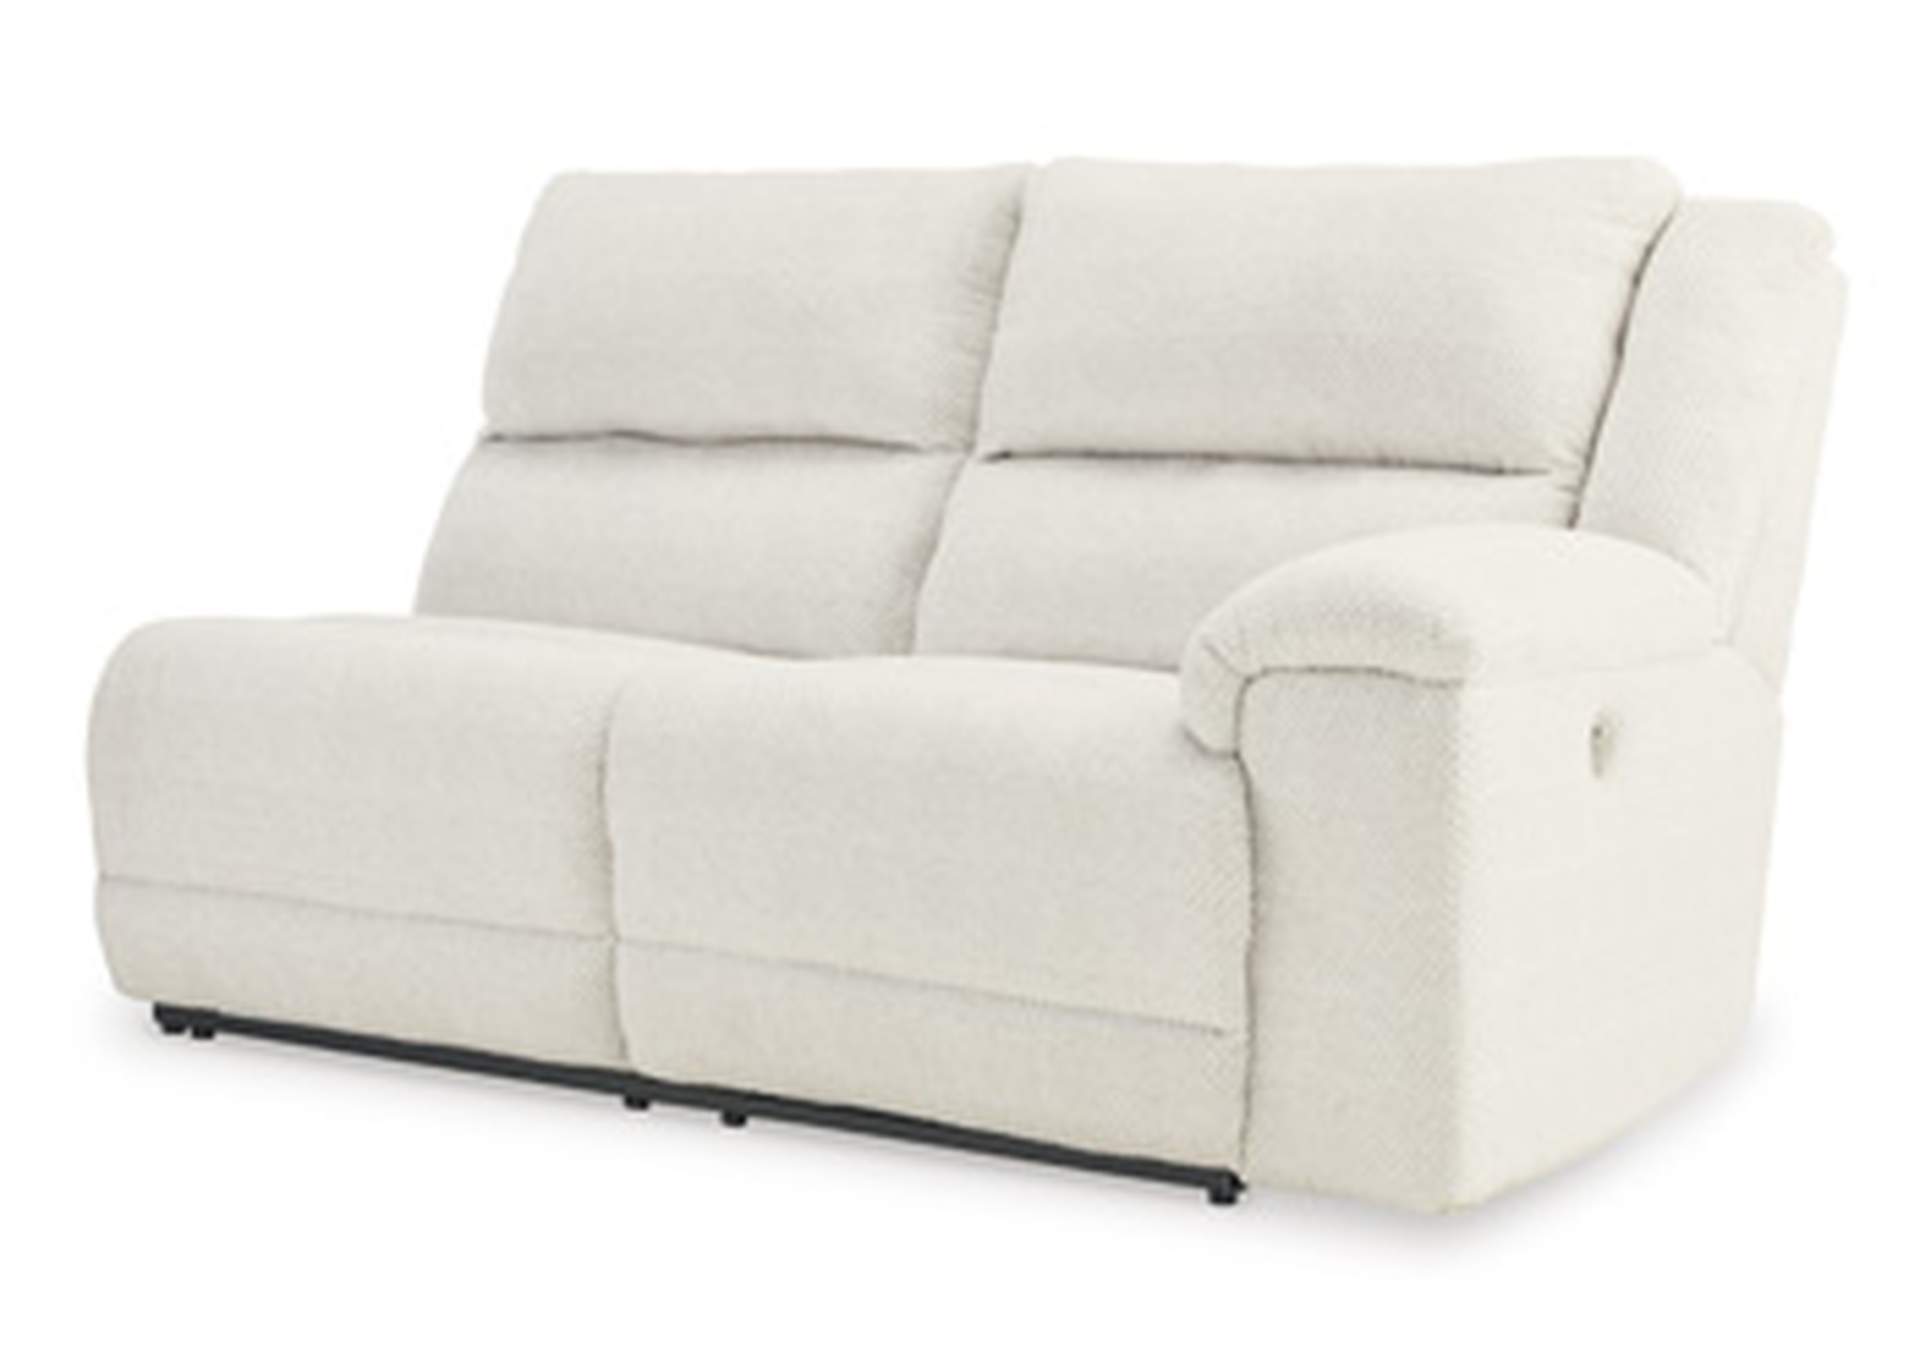 Keensburg Right-Arm Facing Power Reclining Loveseat,Signature Design By Ashley